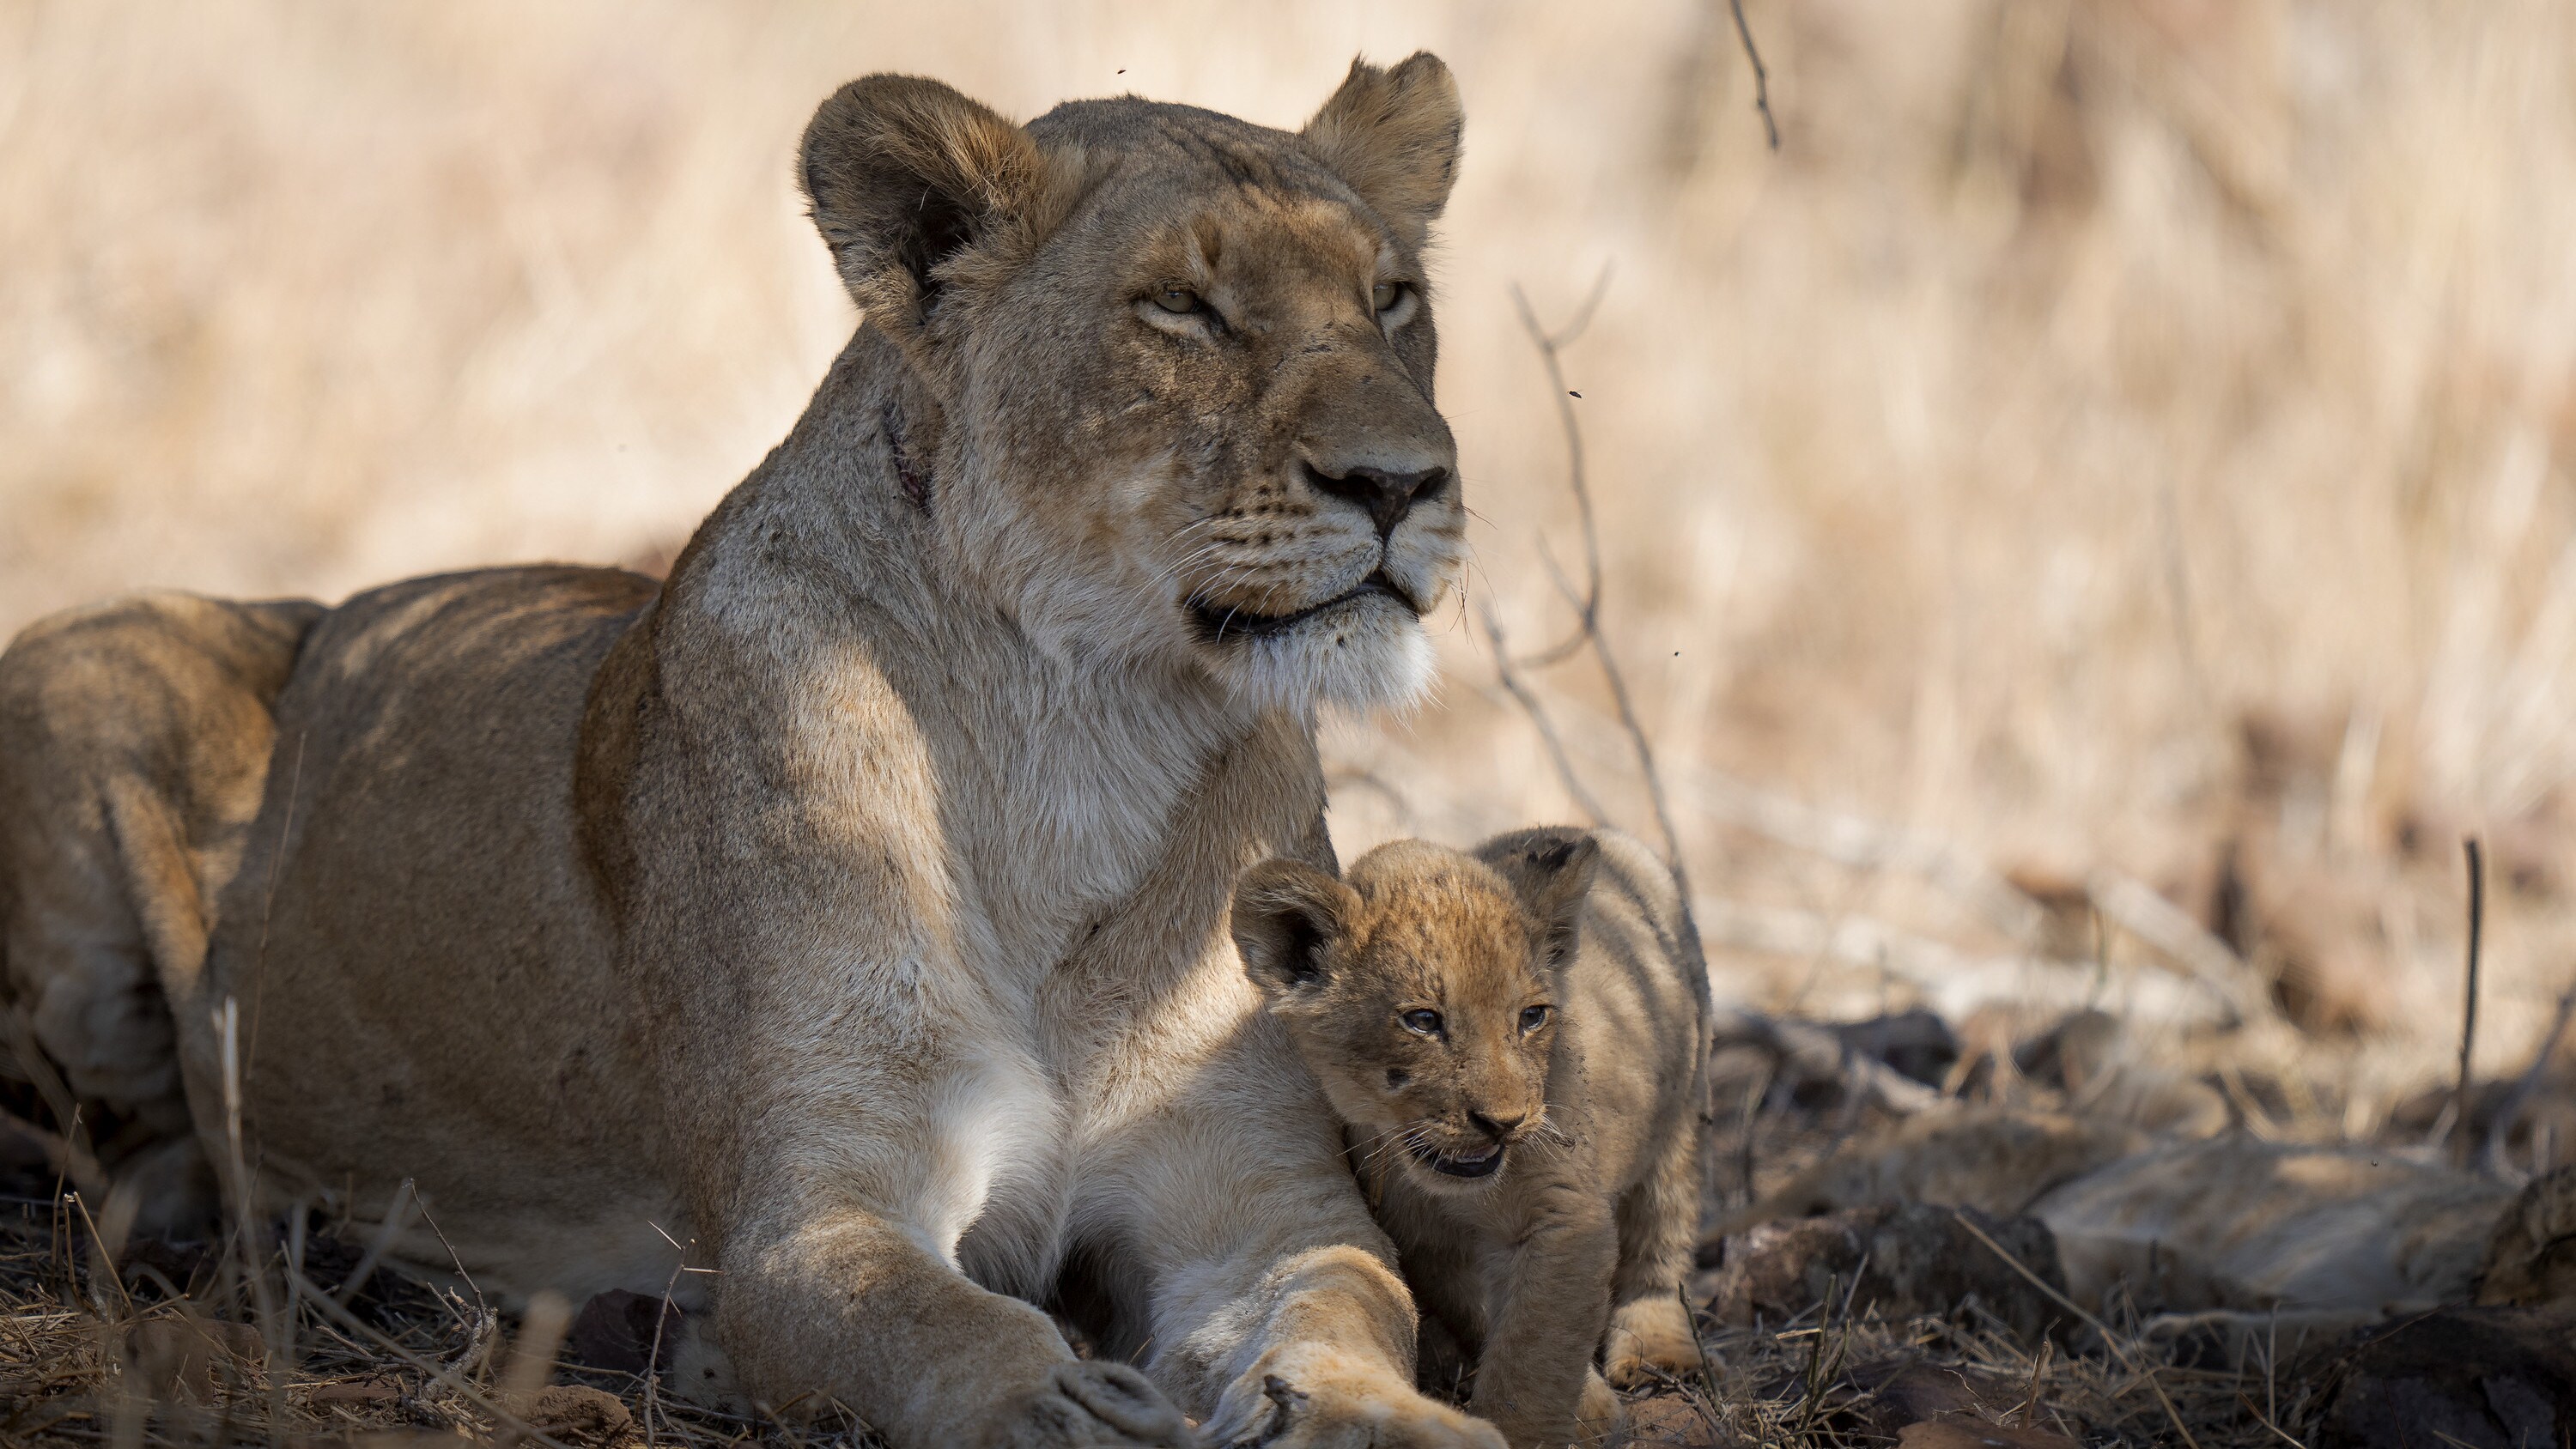 Malika with cub Issa. (National Geographic for Disney+/Russell MacLaughlin)